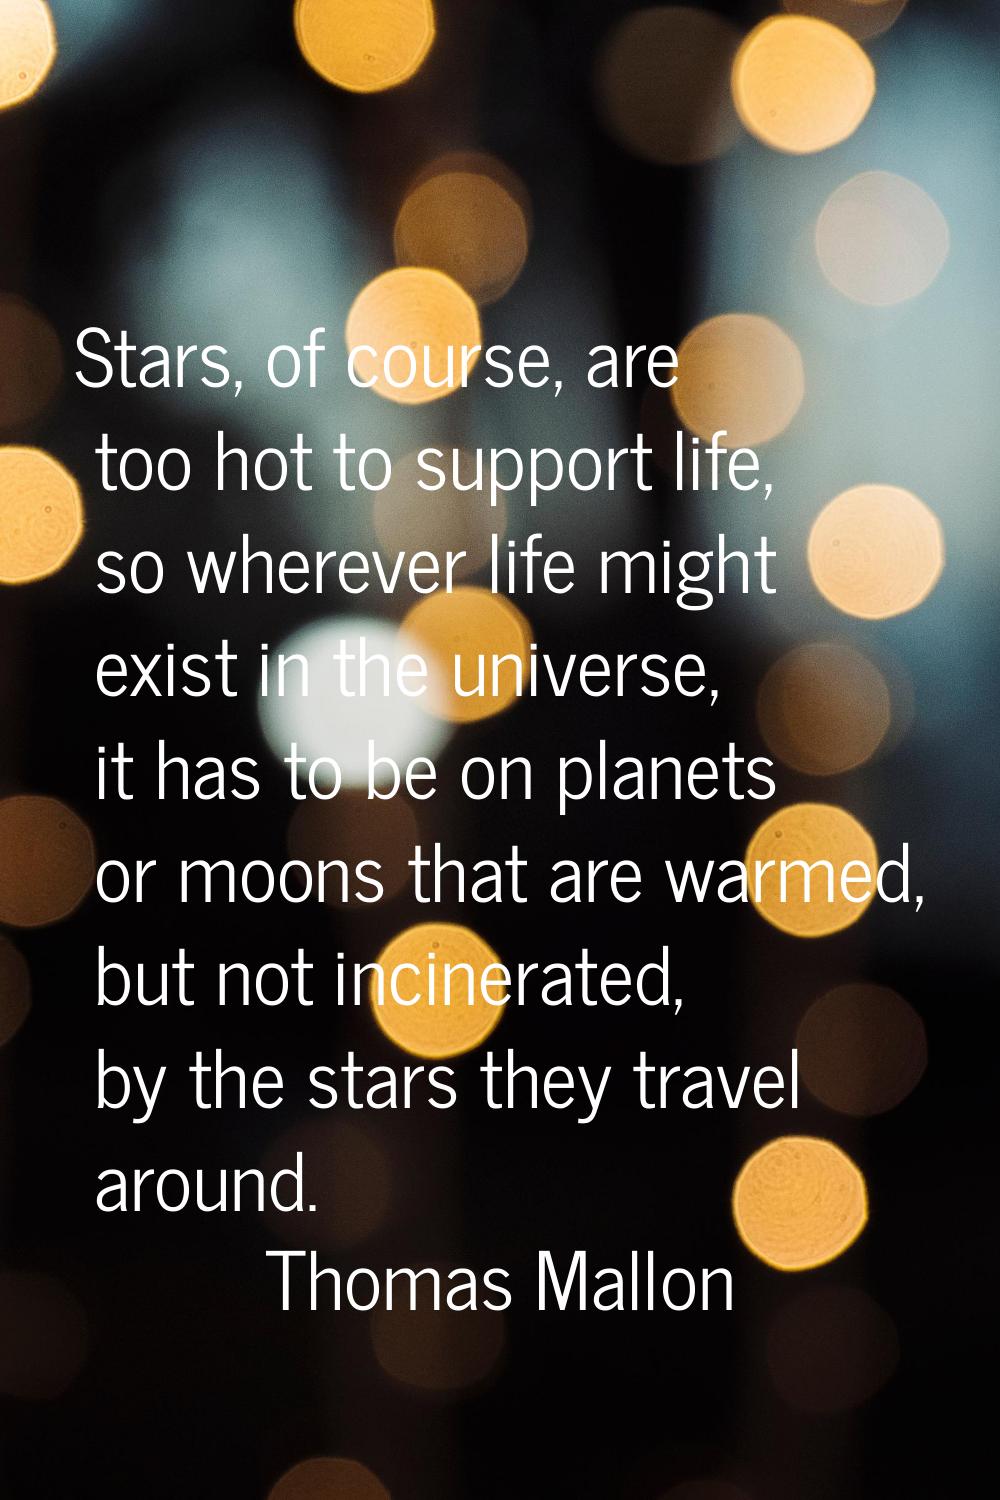 Stars, of course, are too hot to support life, so wherever life might exist in the universe, it has